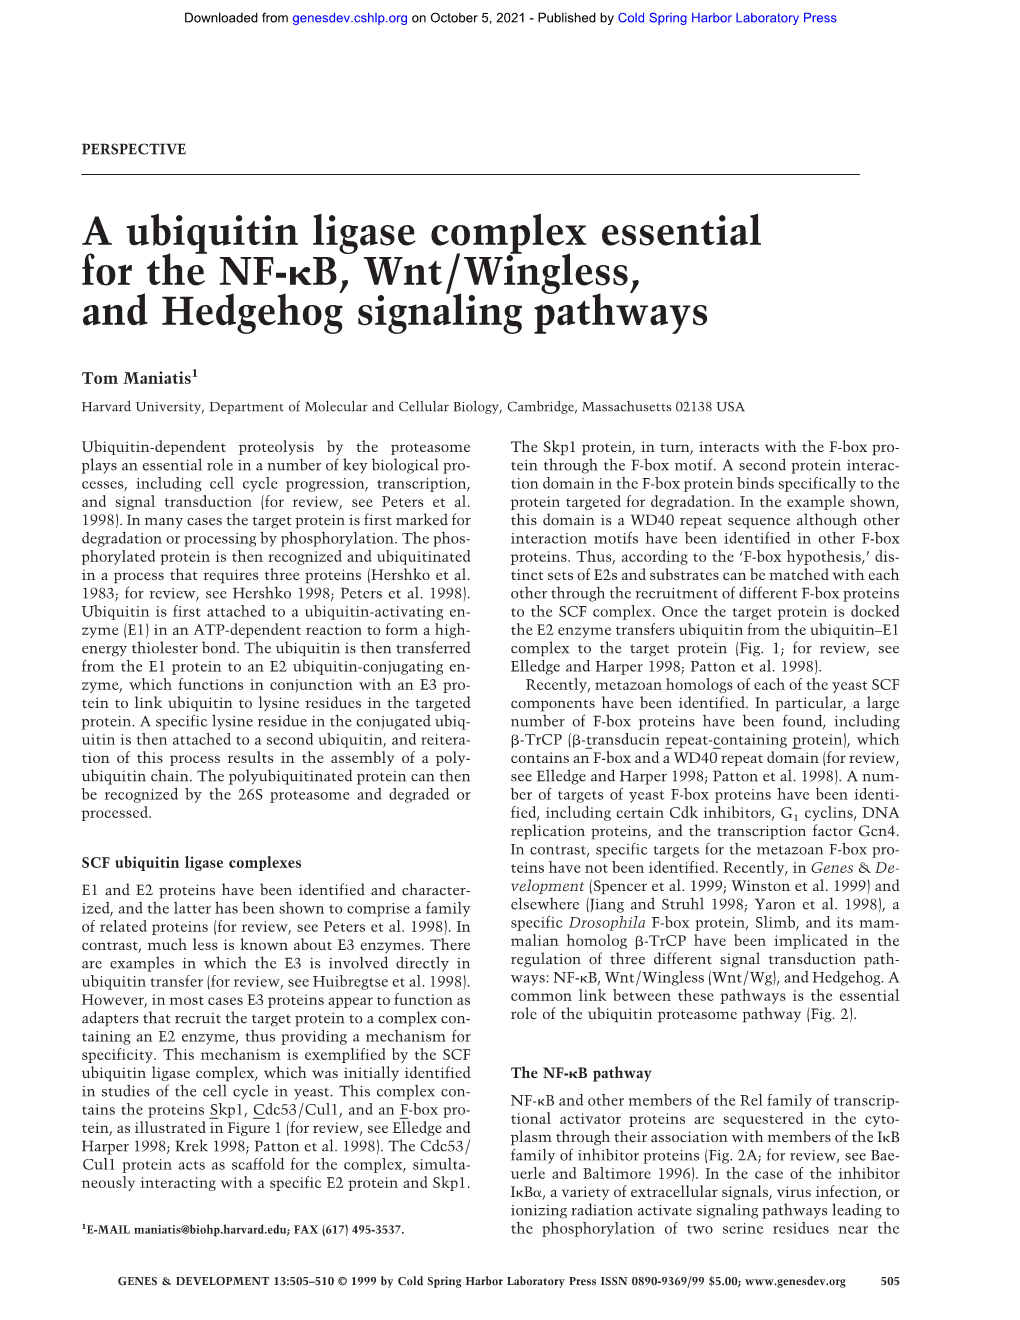 A Ubiquitin Ligase Complex Essential for the NF-␬B, Wnt/Wingless, and Hedgehog Signaling Pathways